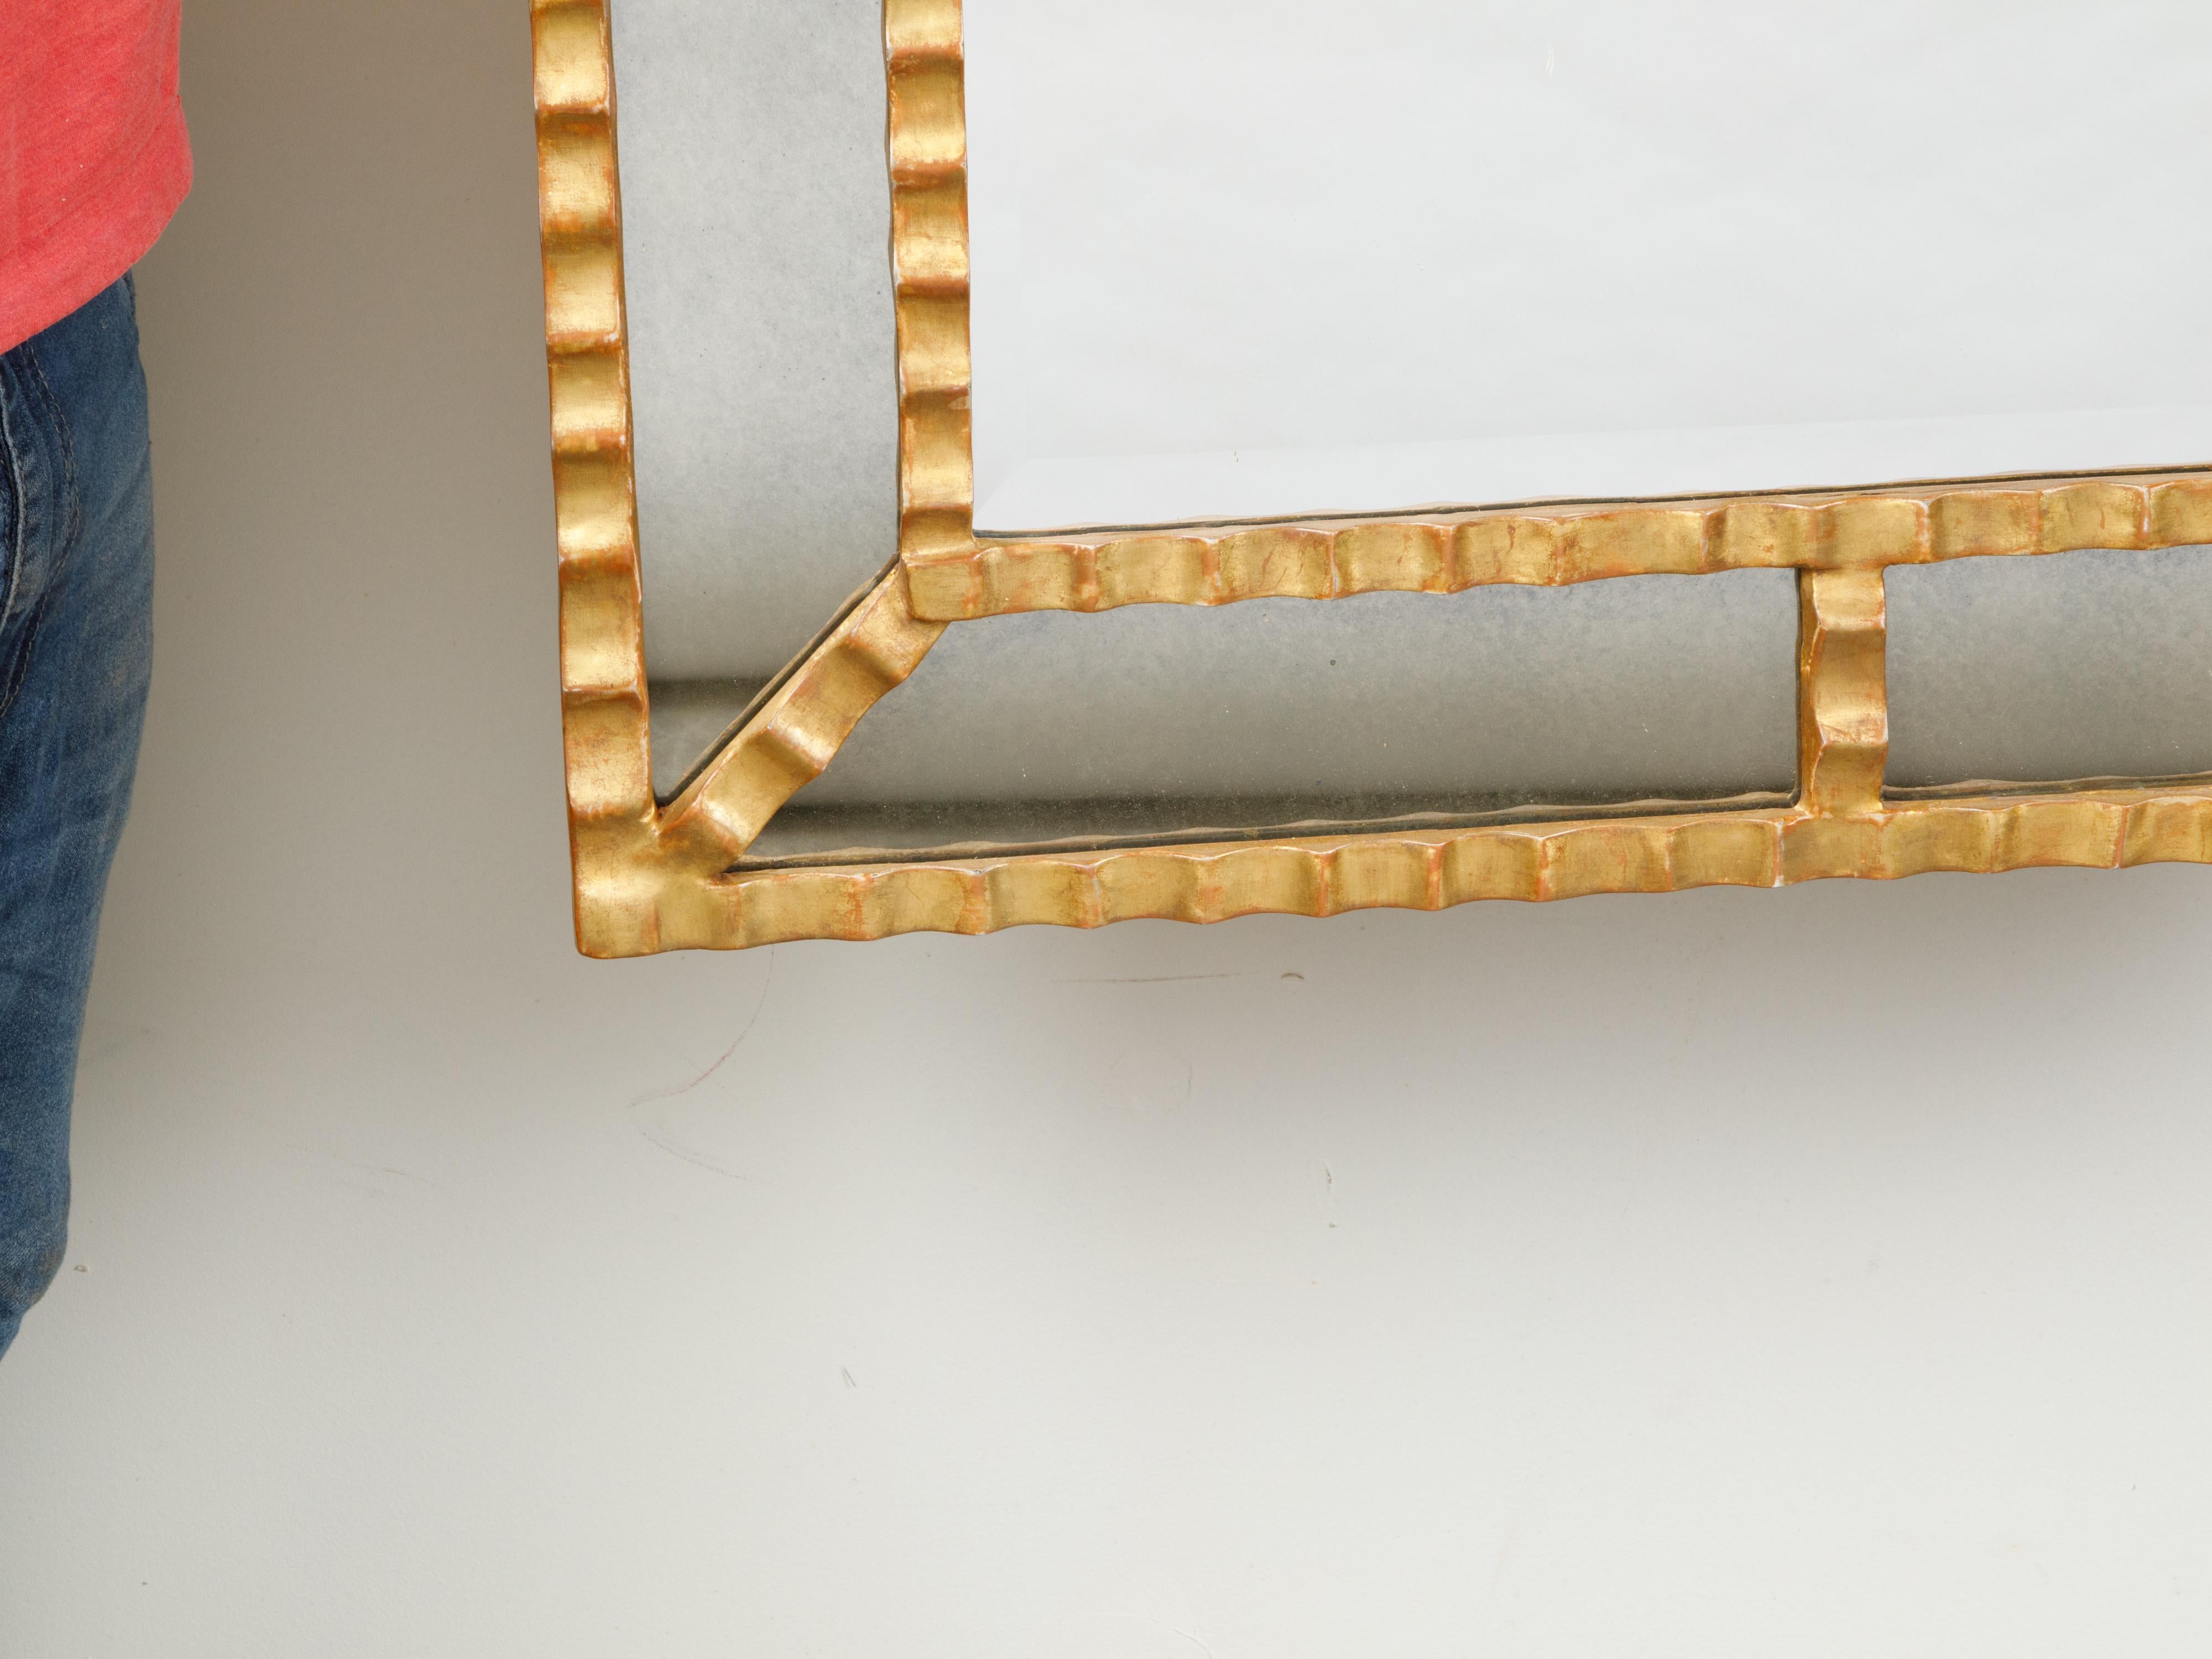 An Italian vintage pareclose gilt metal mirror from the mid 20th century, with grooved motifs. We currently have two mirrors available, priced and sold $5,400 each. Created in Italy during the midcentury period, this gilt metal pareclose mirror